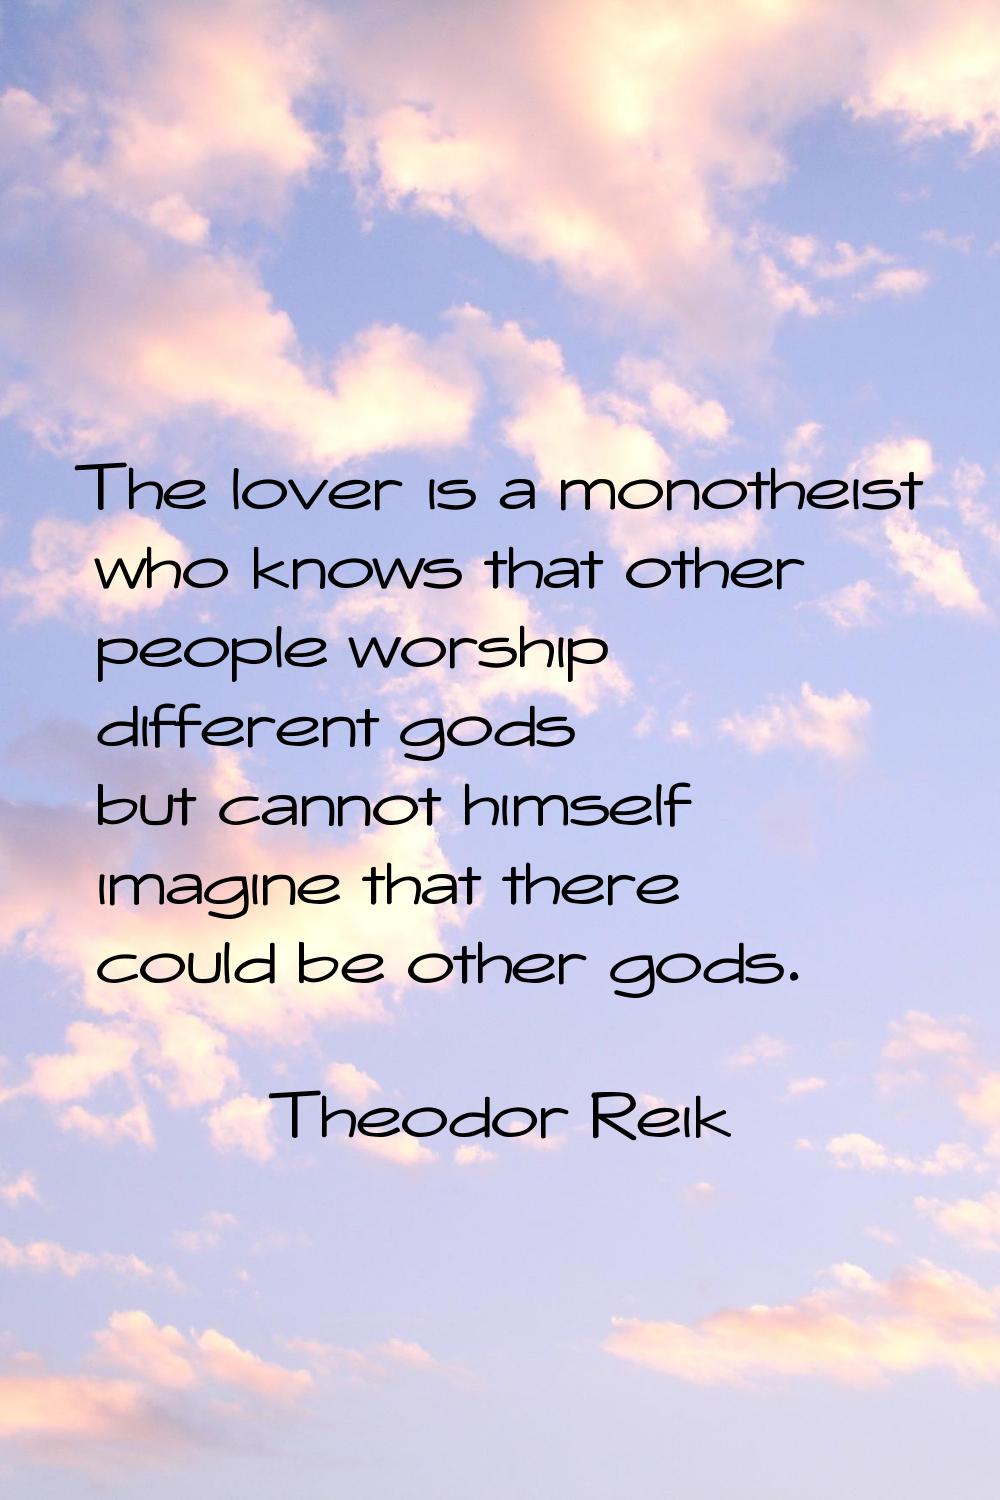 The lover is a monotheist who knows that other people worship different gods but cannot himself ima